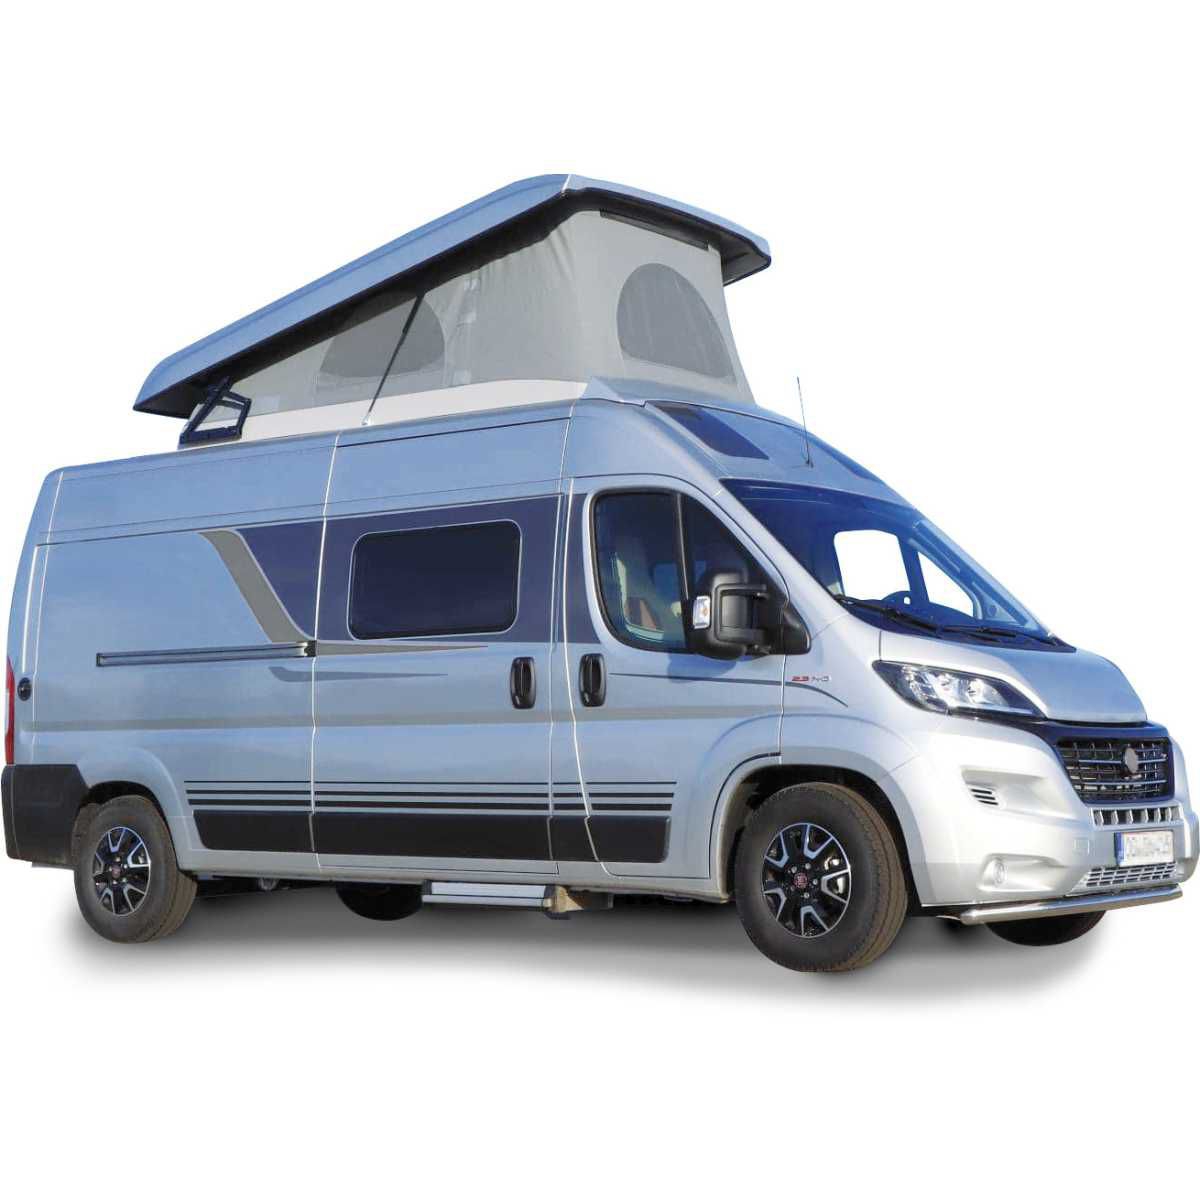 CLAIRVAL Thermomatte THERMICAMP Roof TRIGANO STD auf Fiat Ducato ab Bj- 09-2021 Art- Nr. LTMTRIG01